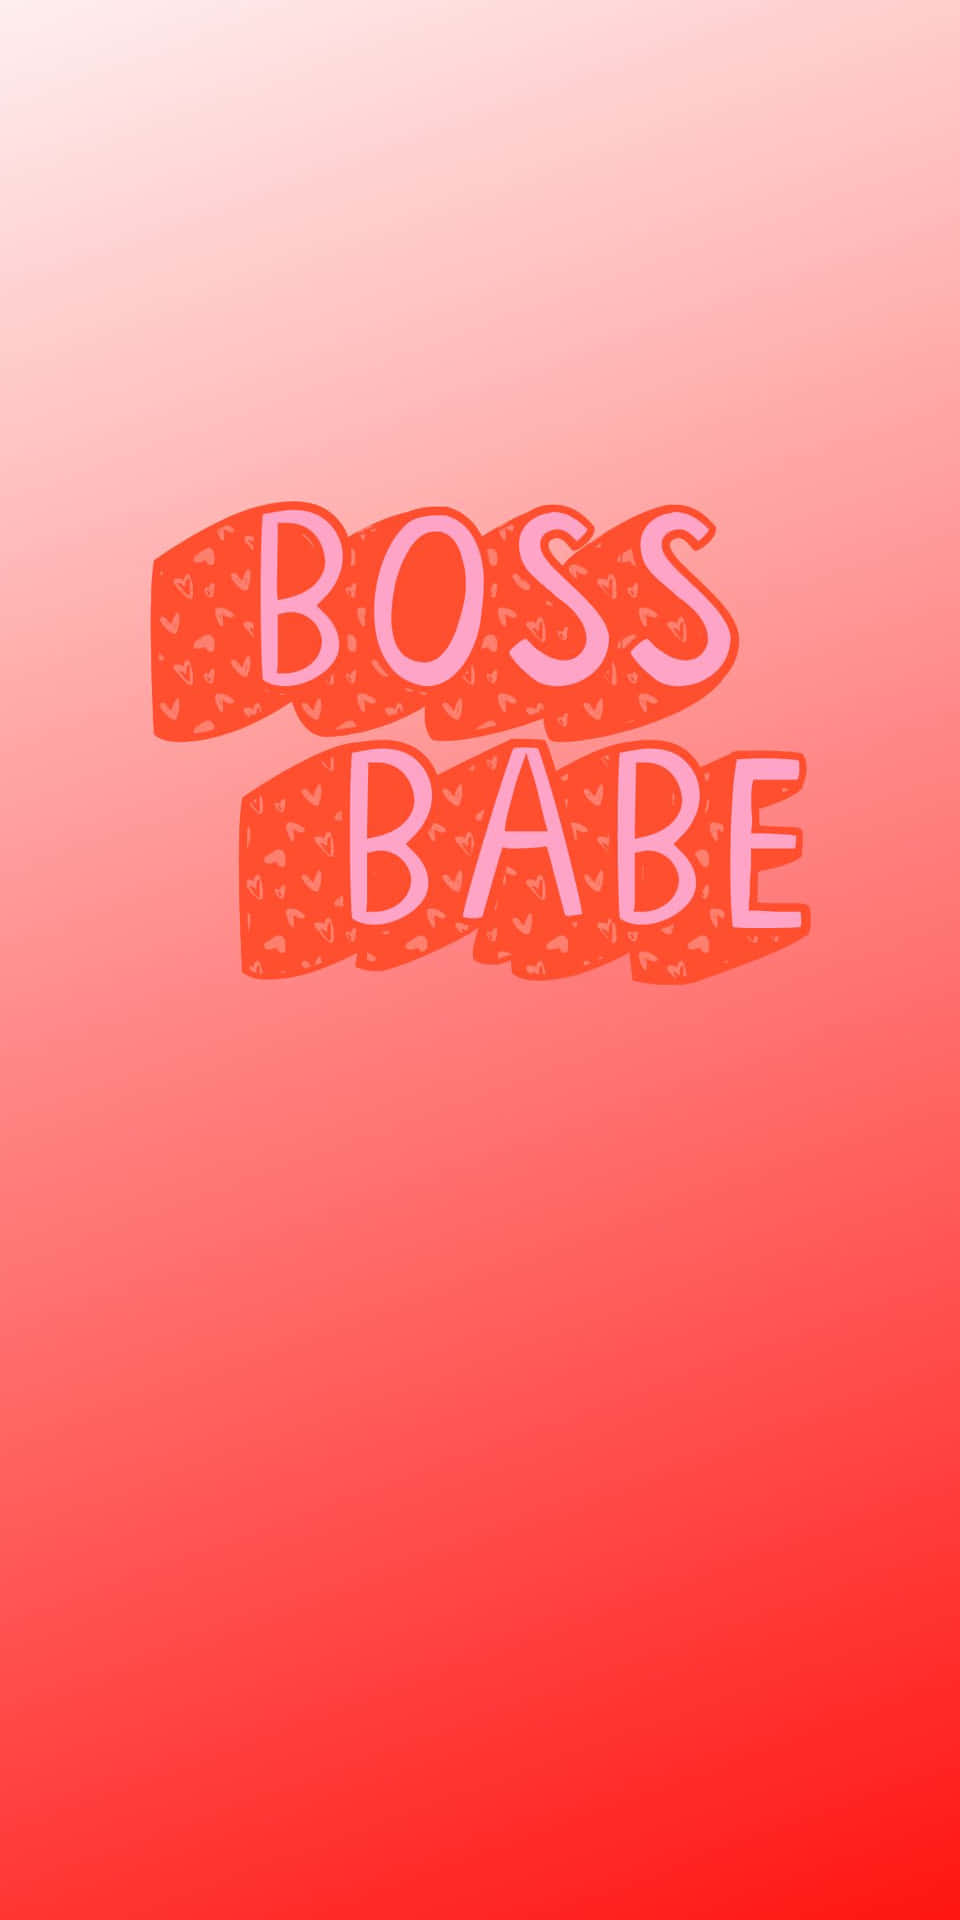 Boss Babe Typography Red Gradient Background